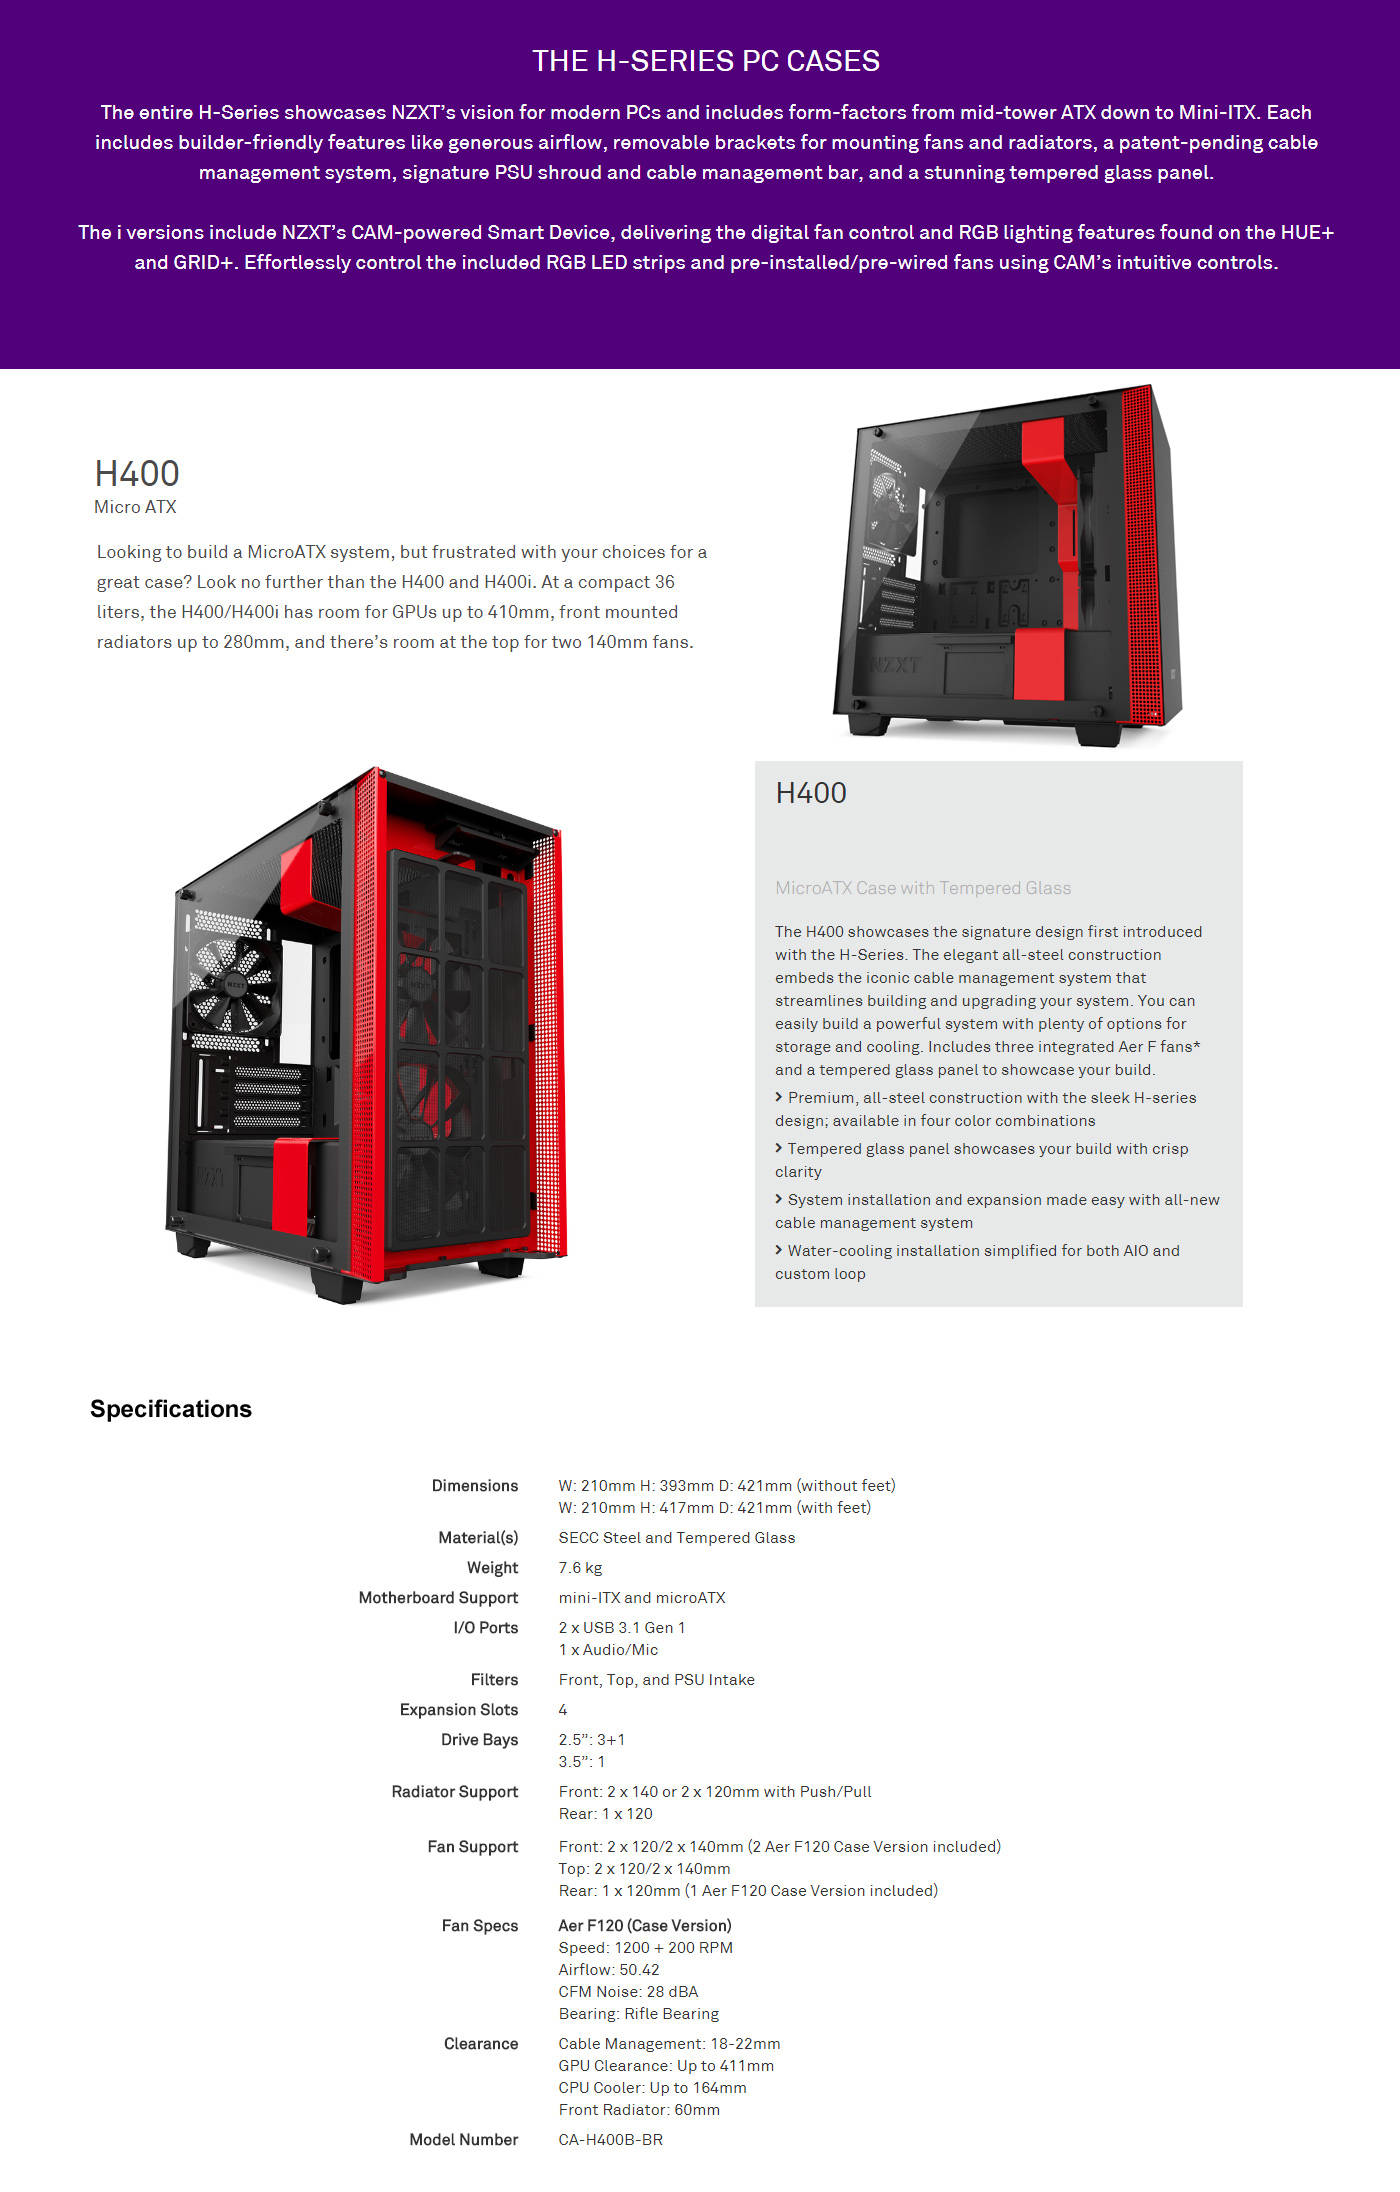  Buy Online Nzxt H400 MicroATX Case with Tempered Glass - Matte Black-Red (CA-H400B-BR)